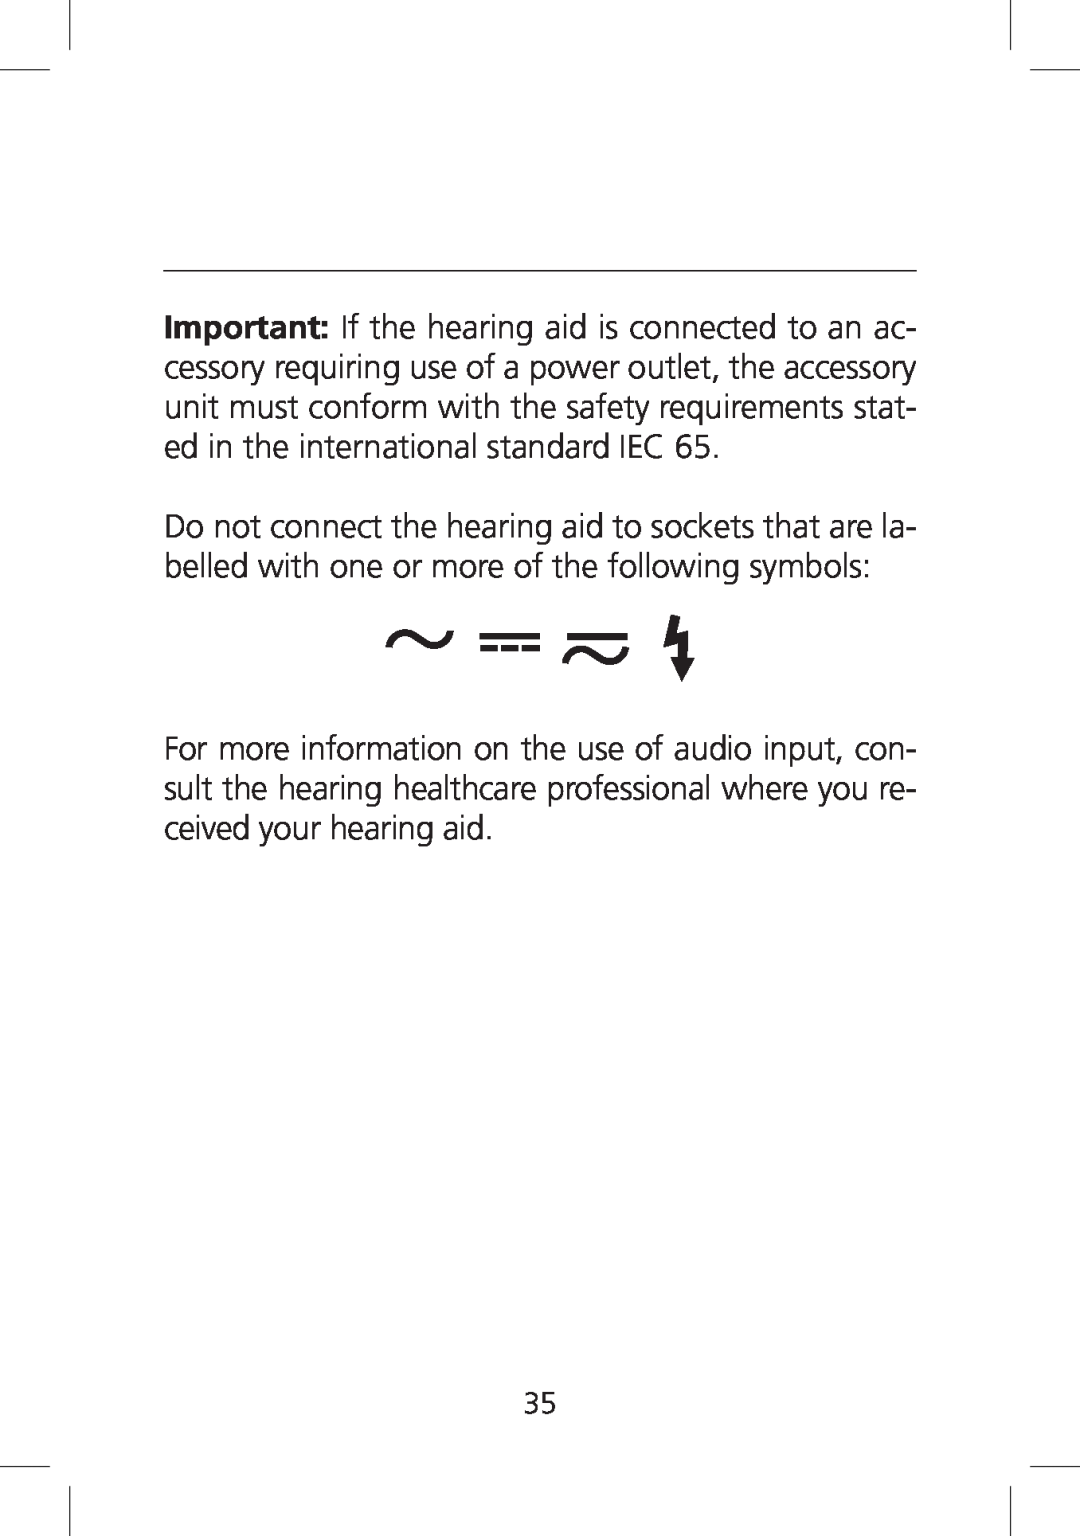 SV Sound SV-19 Do not connect the hearing aid to sockets that are la- belled with one or more of the following symbols 